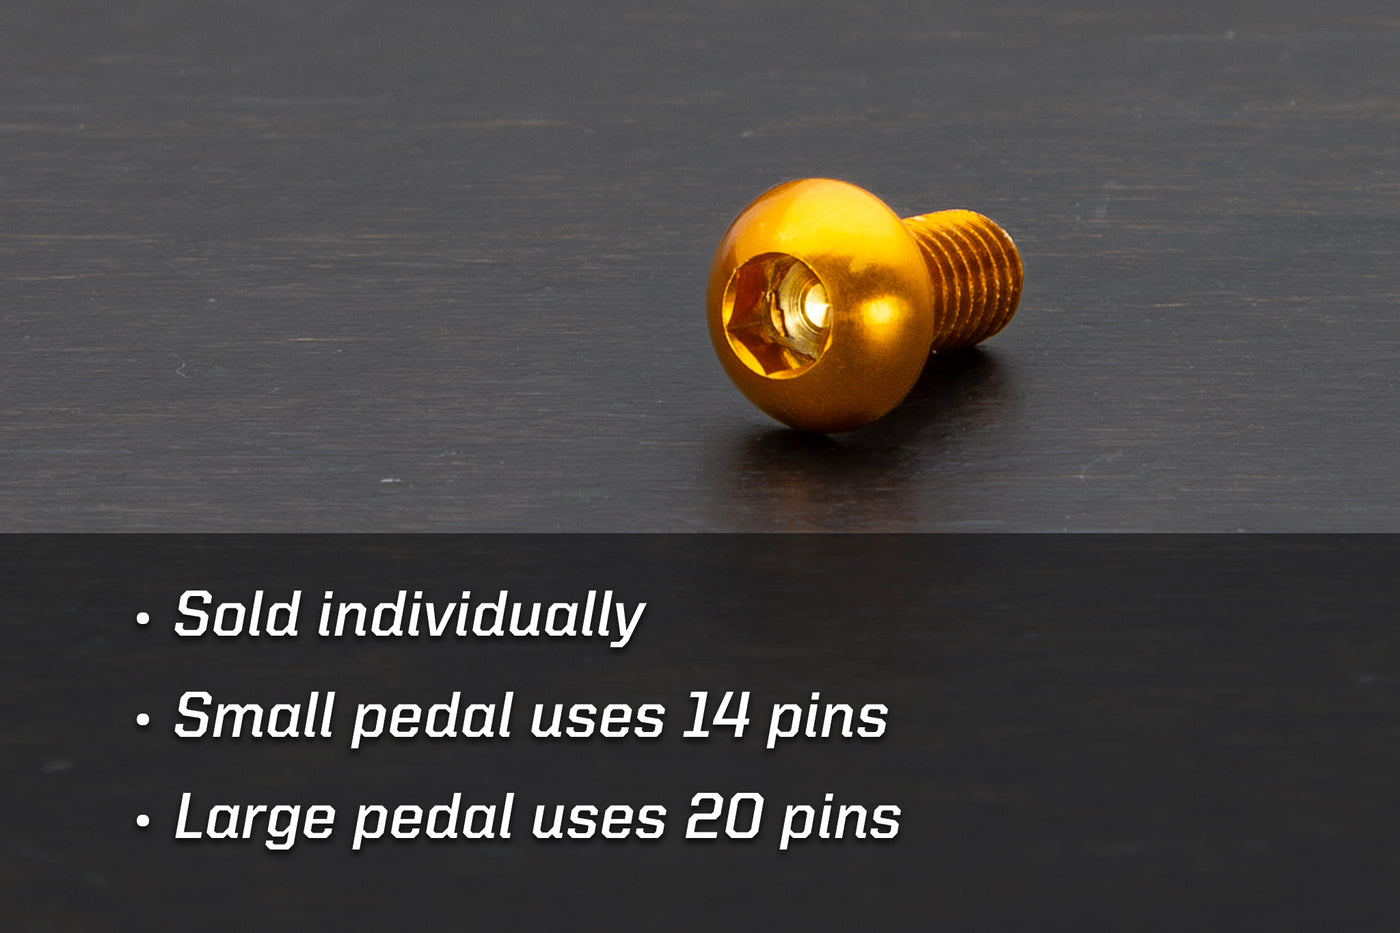 Chilao Pedal Replacement Pin